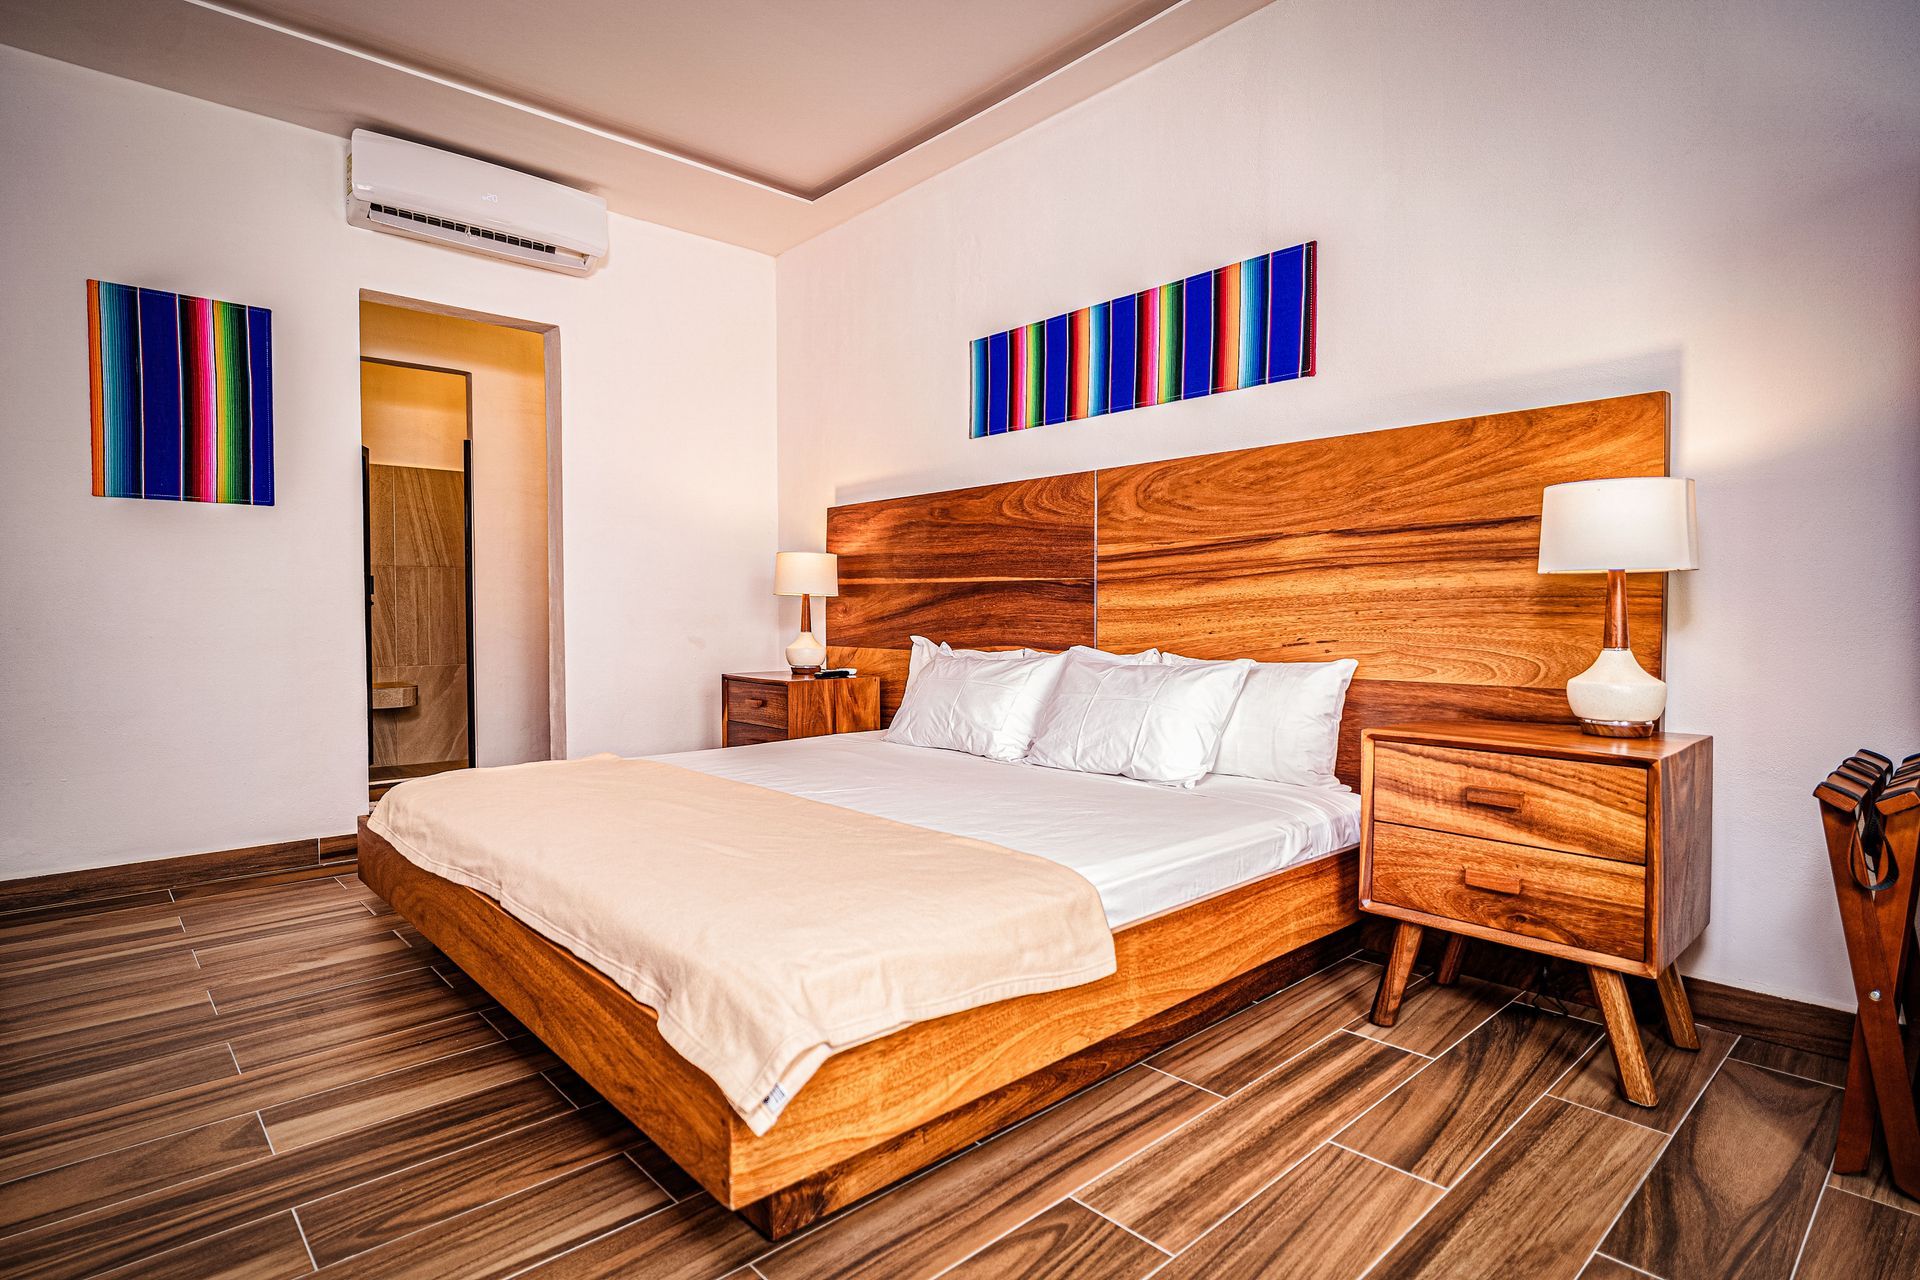 A bedroom with a king size bed , nightstands , lamps and a wooden headboard at nomads the party hostel in cancun.